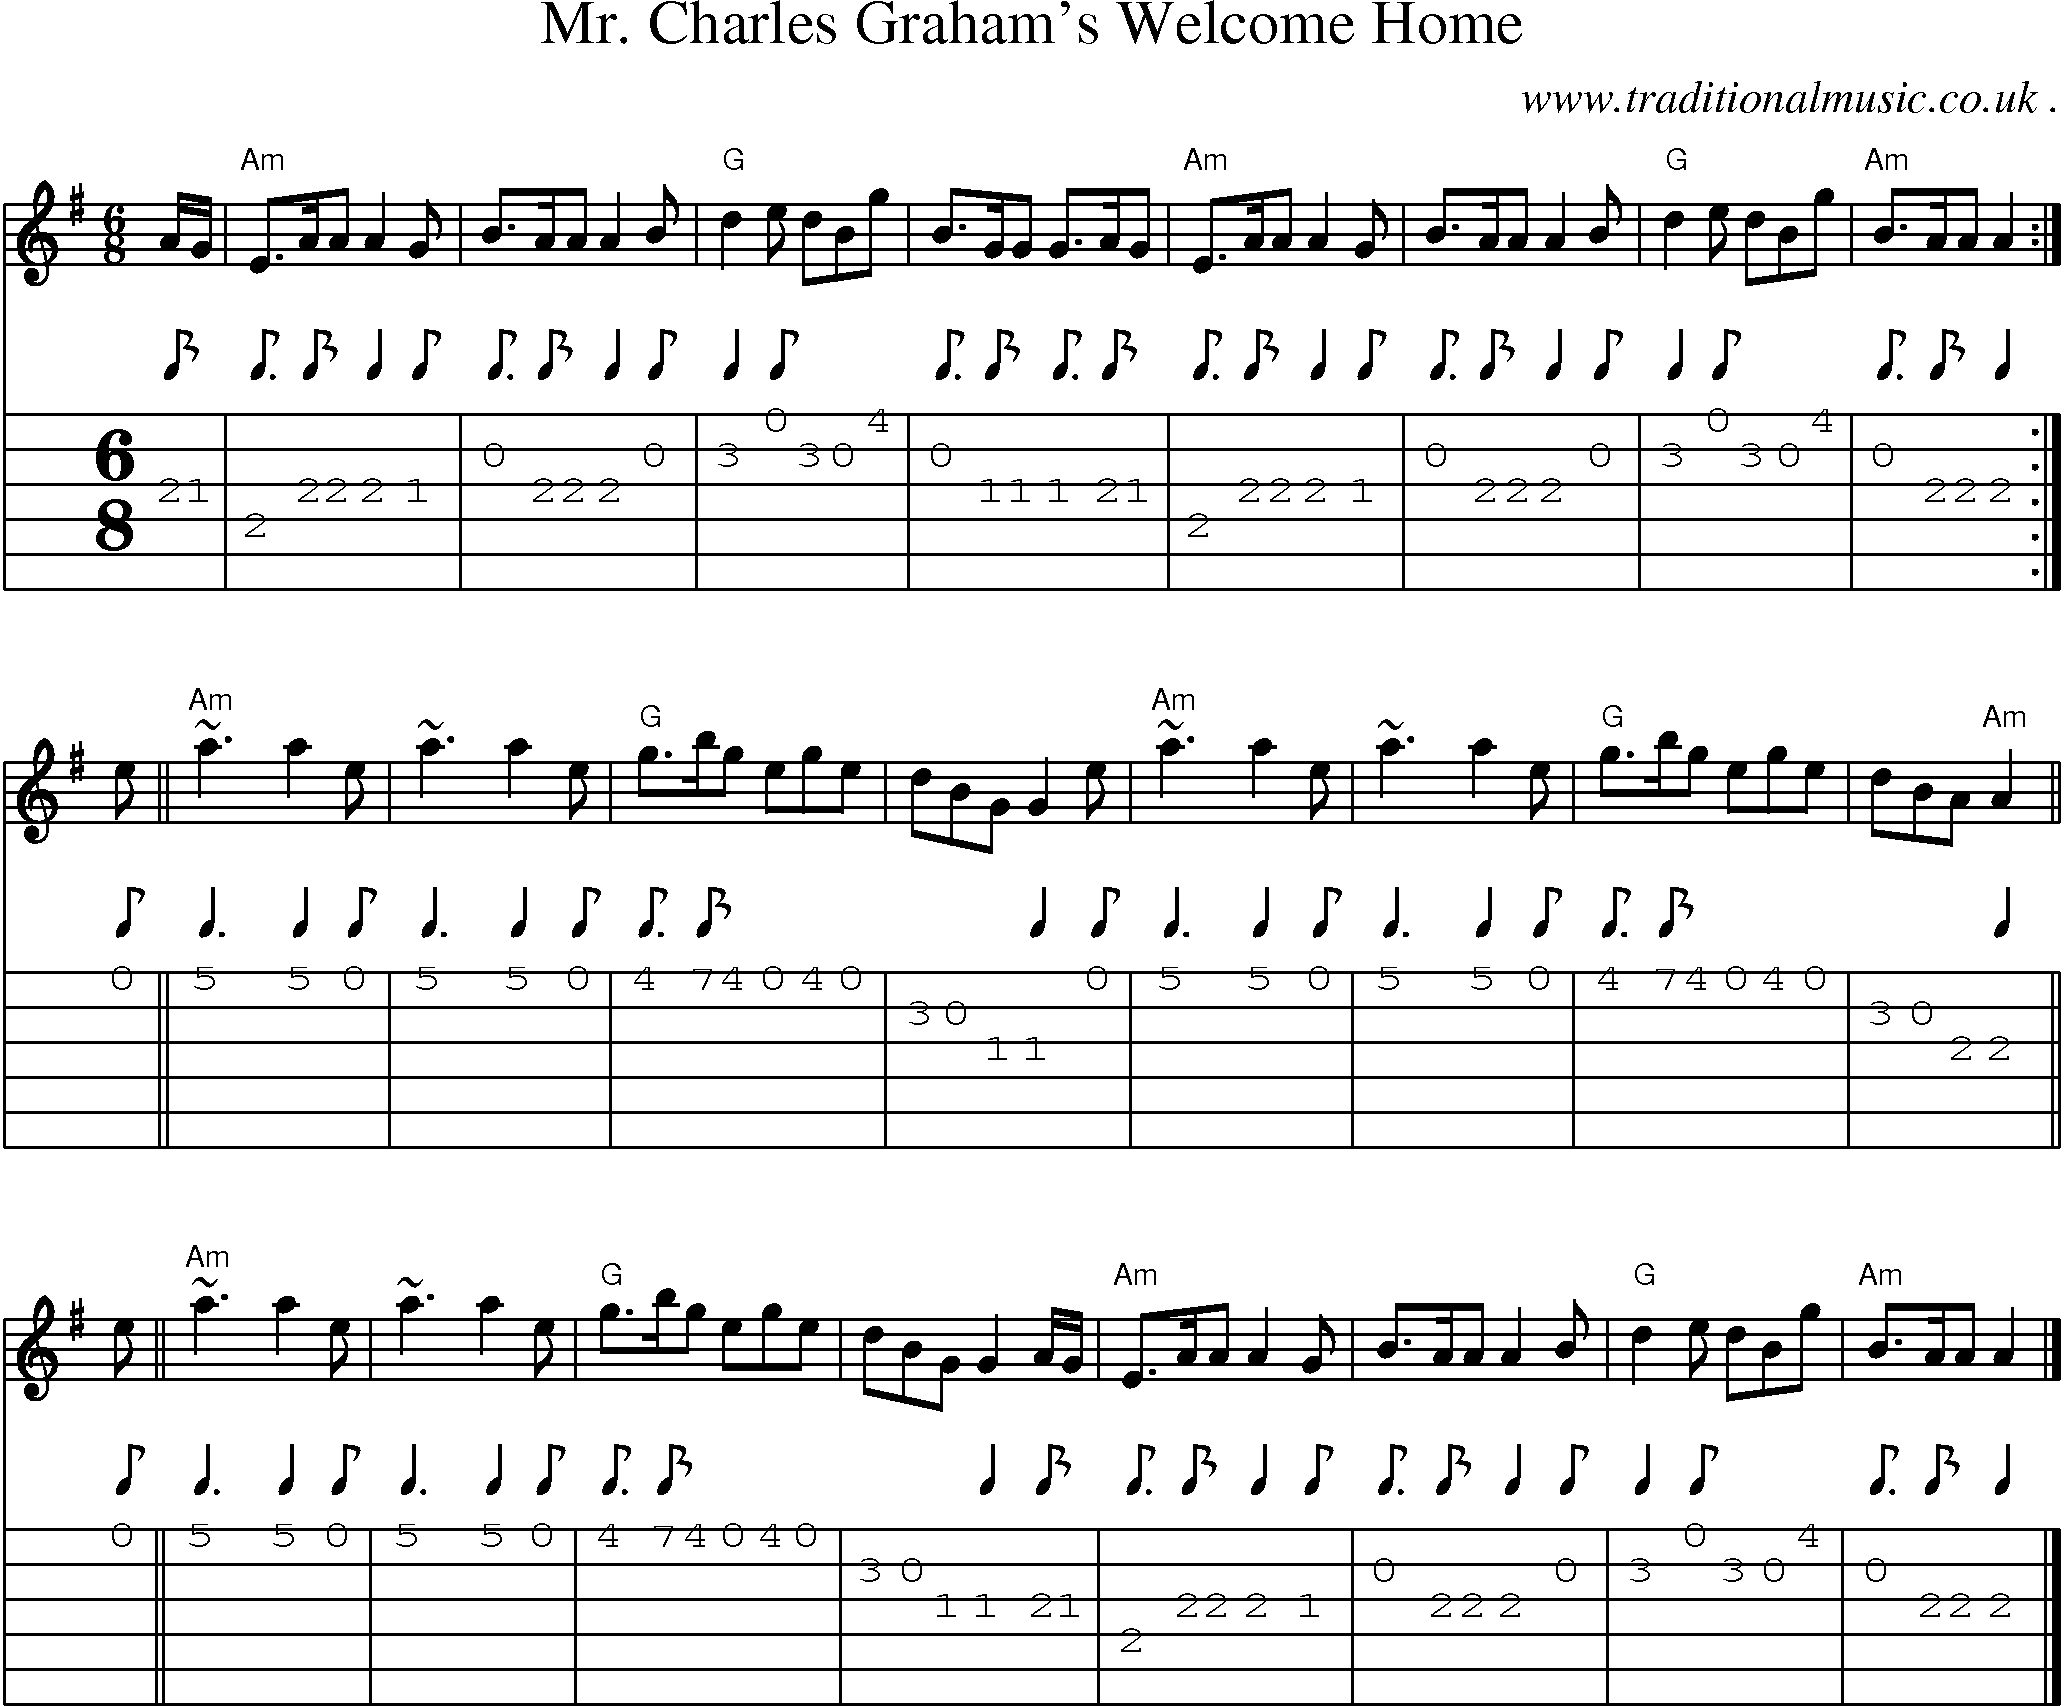 Sheet-music  score, Chords and Guitar Tabs for Mr Charles Grahams Welcome Home